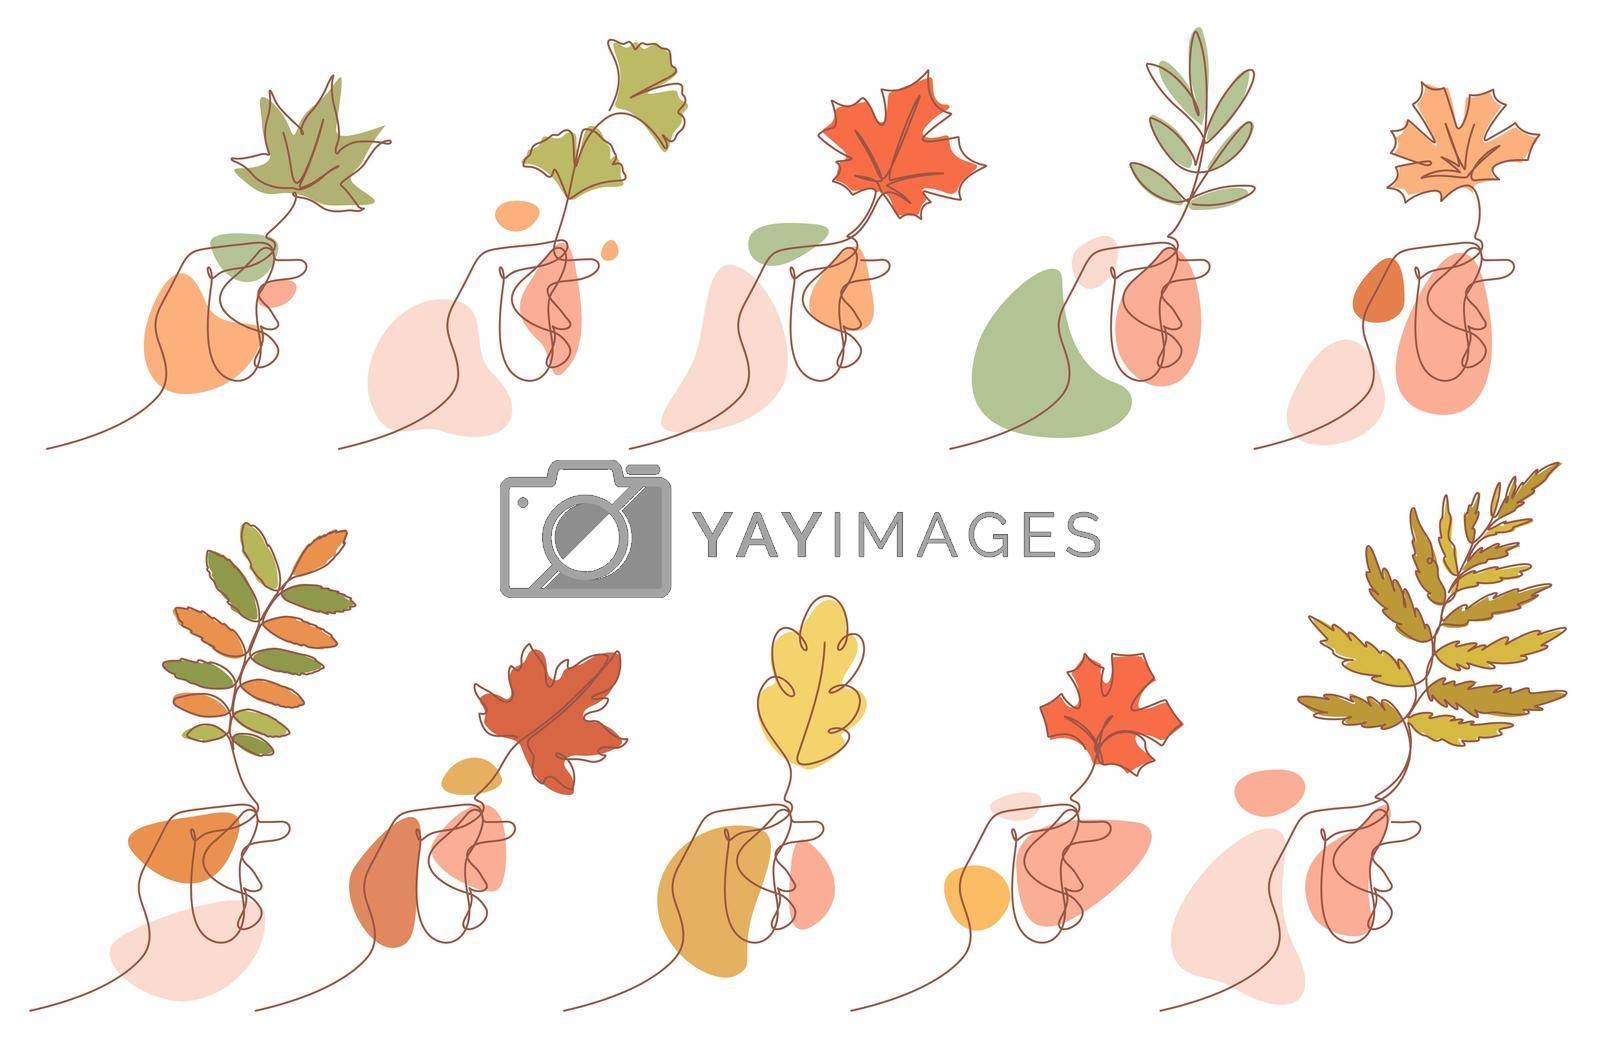 Royalty free image of continuous line drawing of hand holding autumn leaves by dhtgip